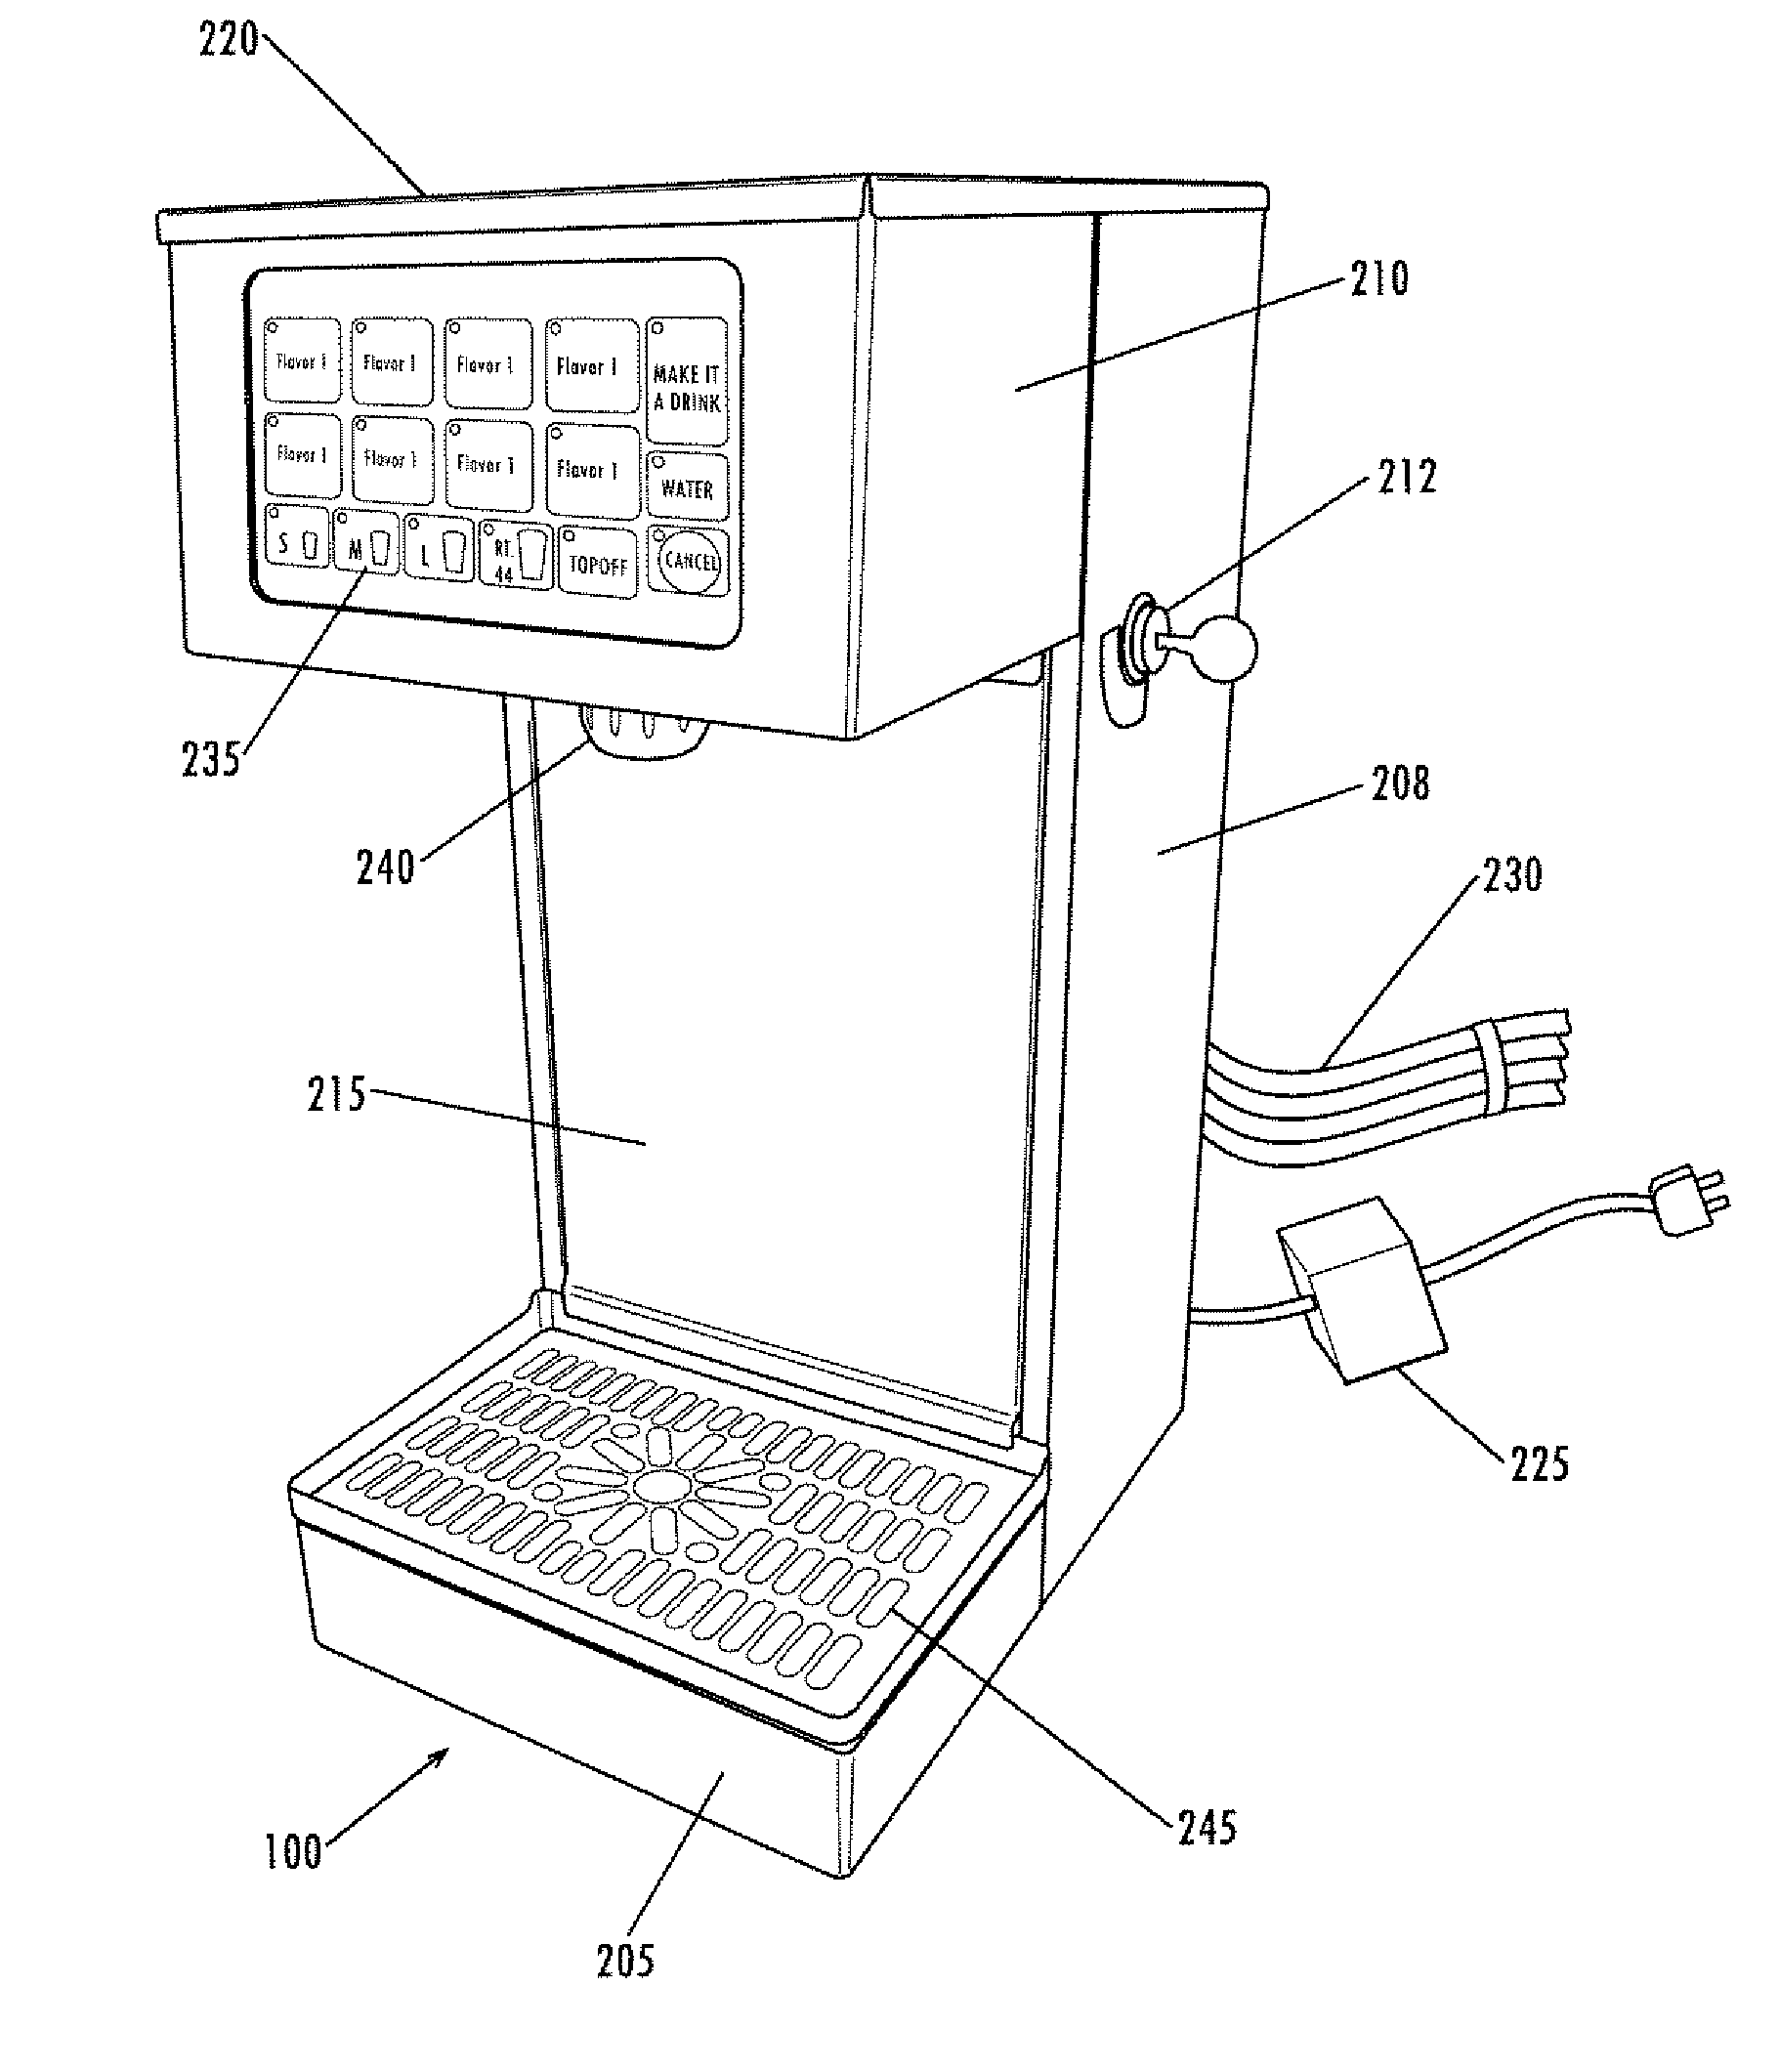 Systems and methods for dispensing flavor doses and blended beverages